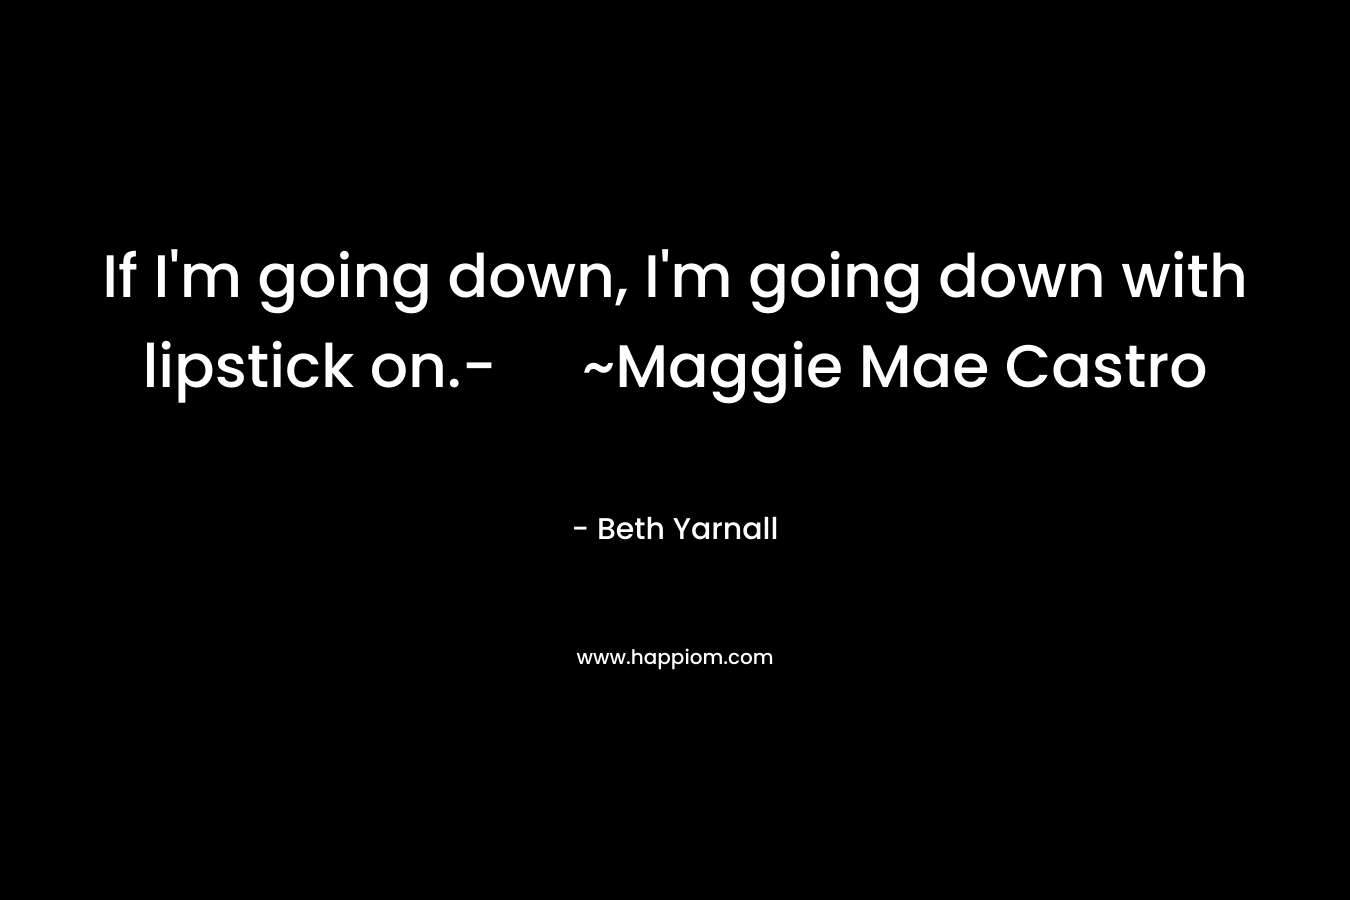 If I'm going down, I'm going down with lipstick on.- ~Maggie Mae Castro